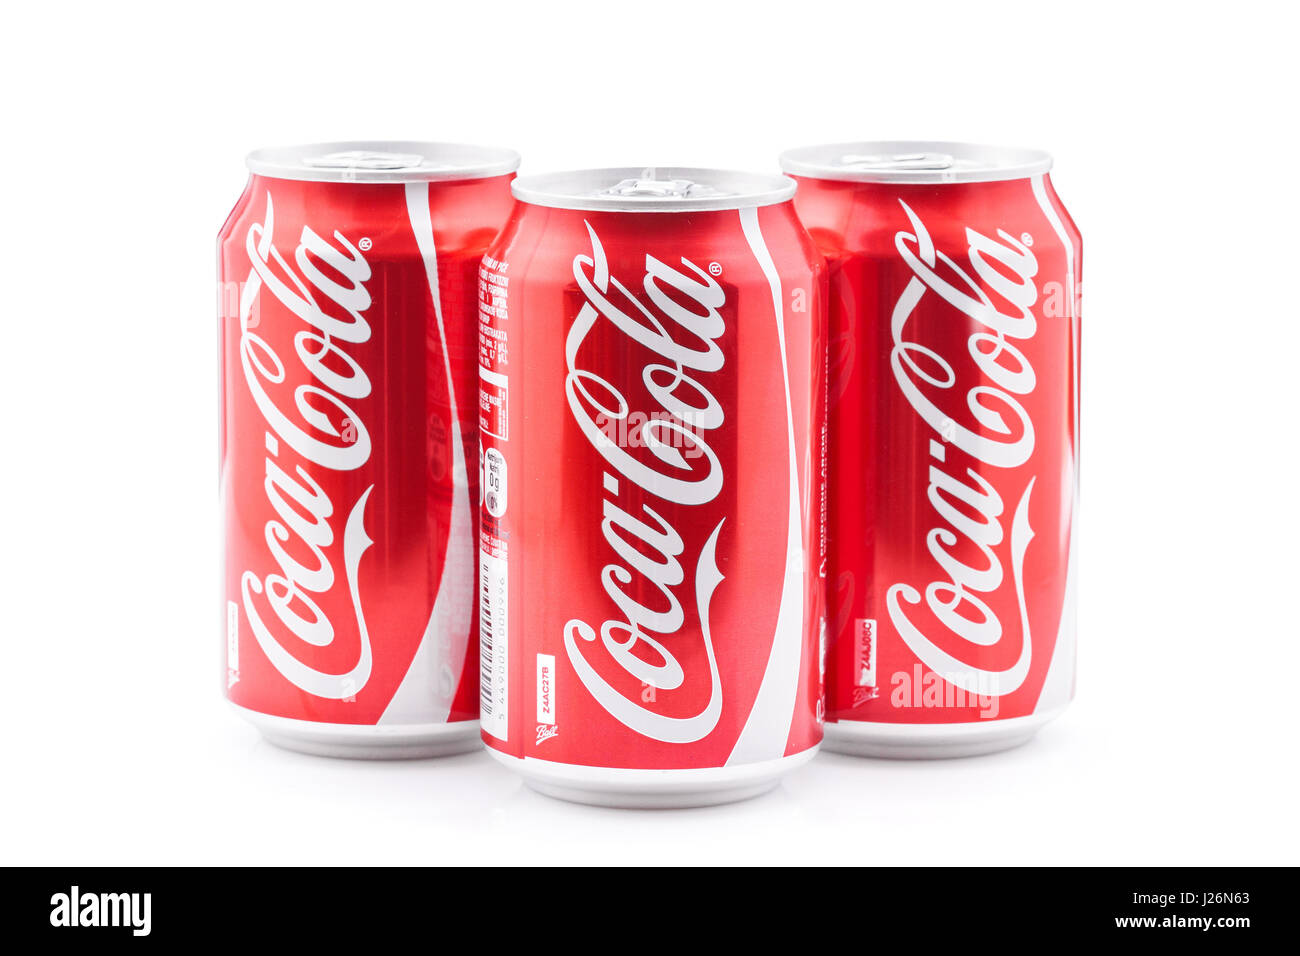 Belgrade, Serbia - October 7, 2014:Three Coca Cola cans isolated on white background. Stock Photo